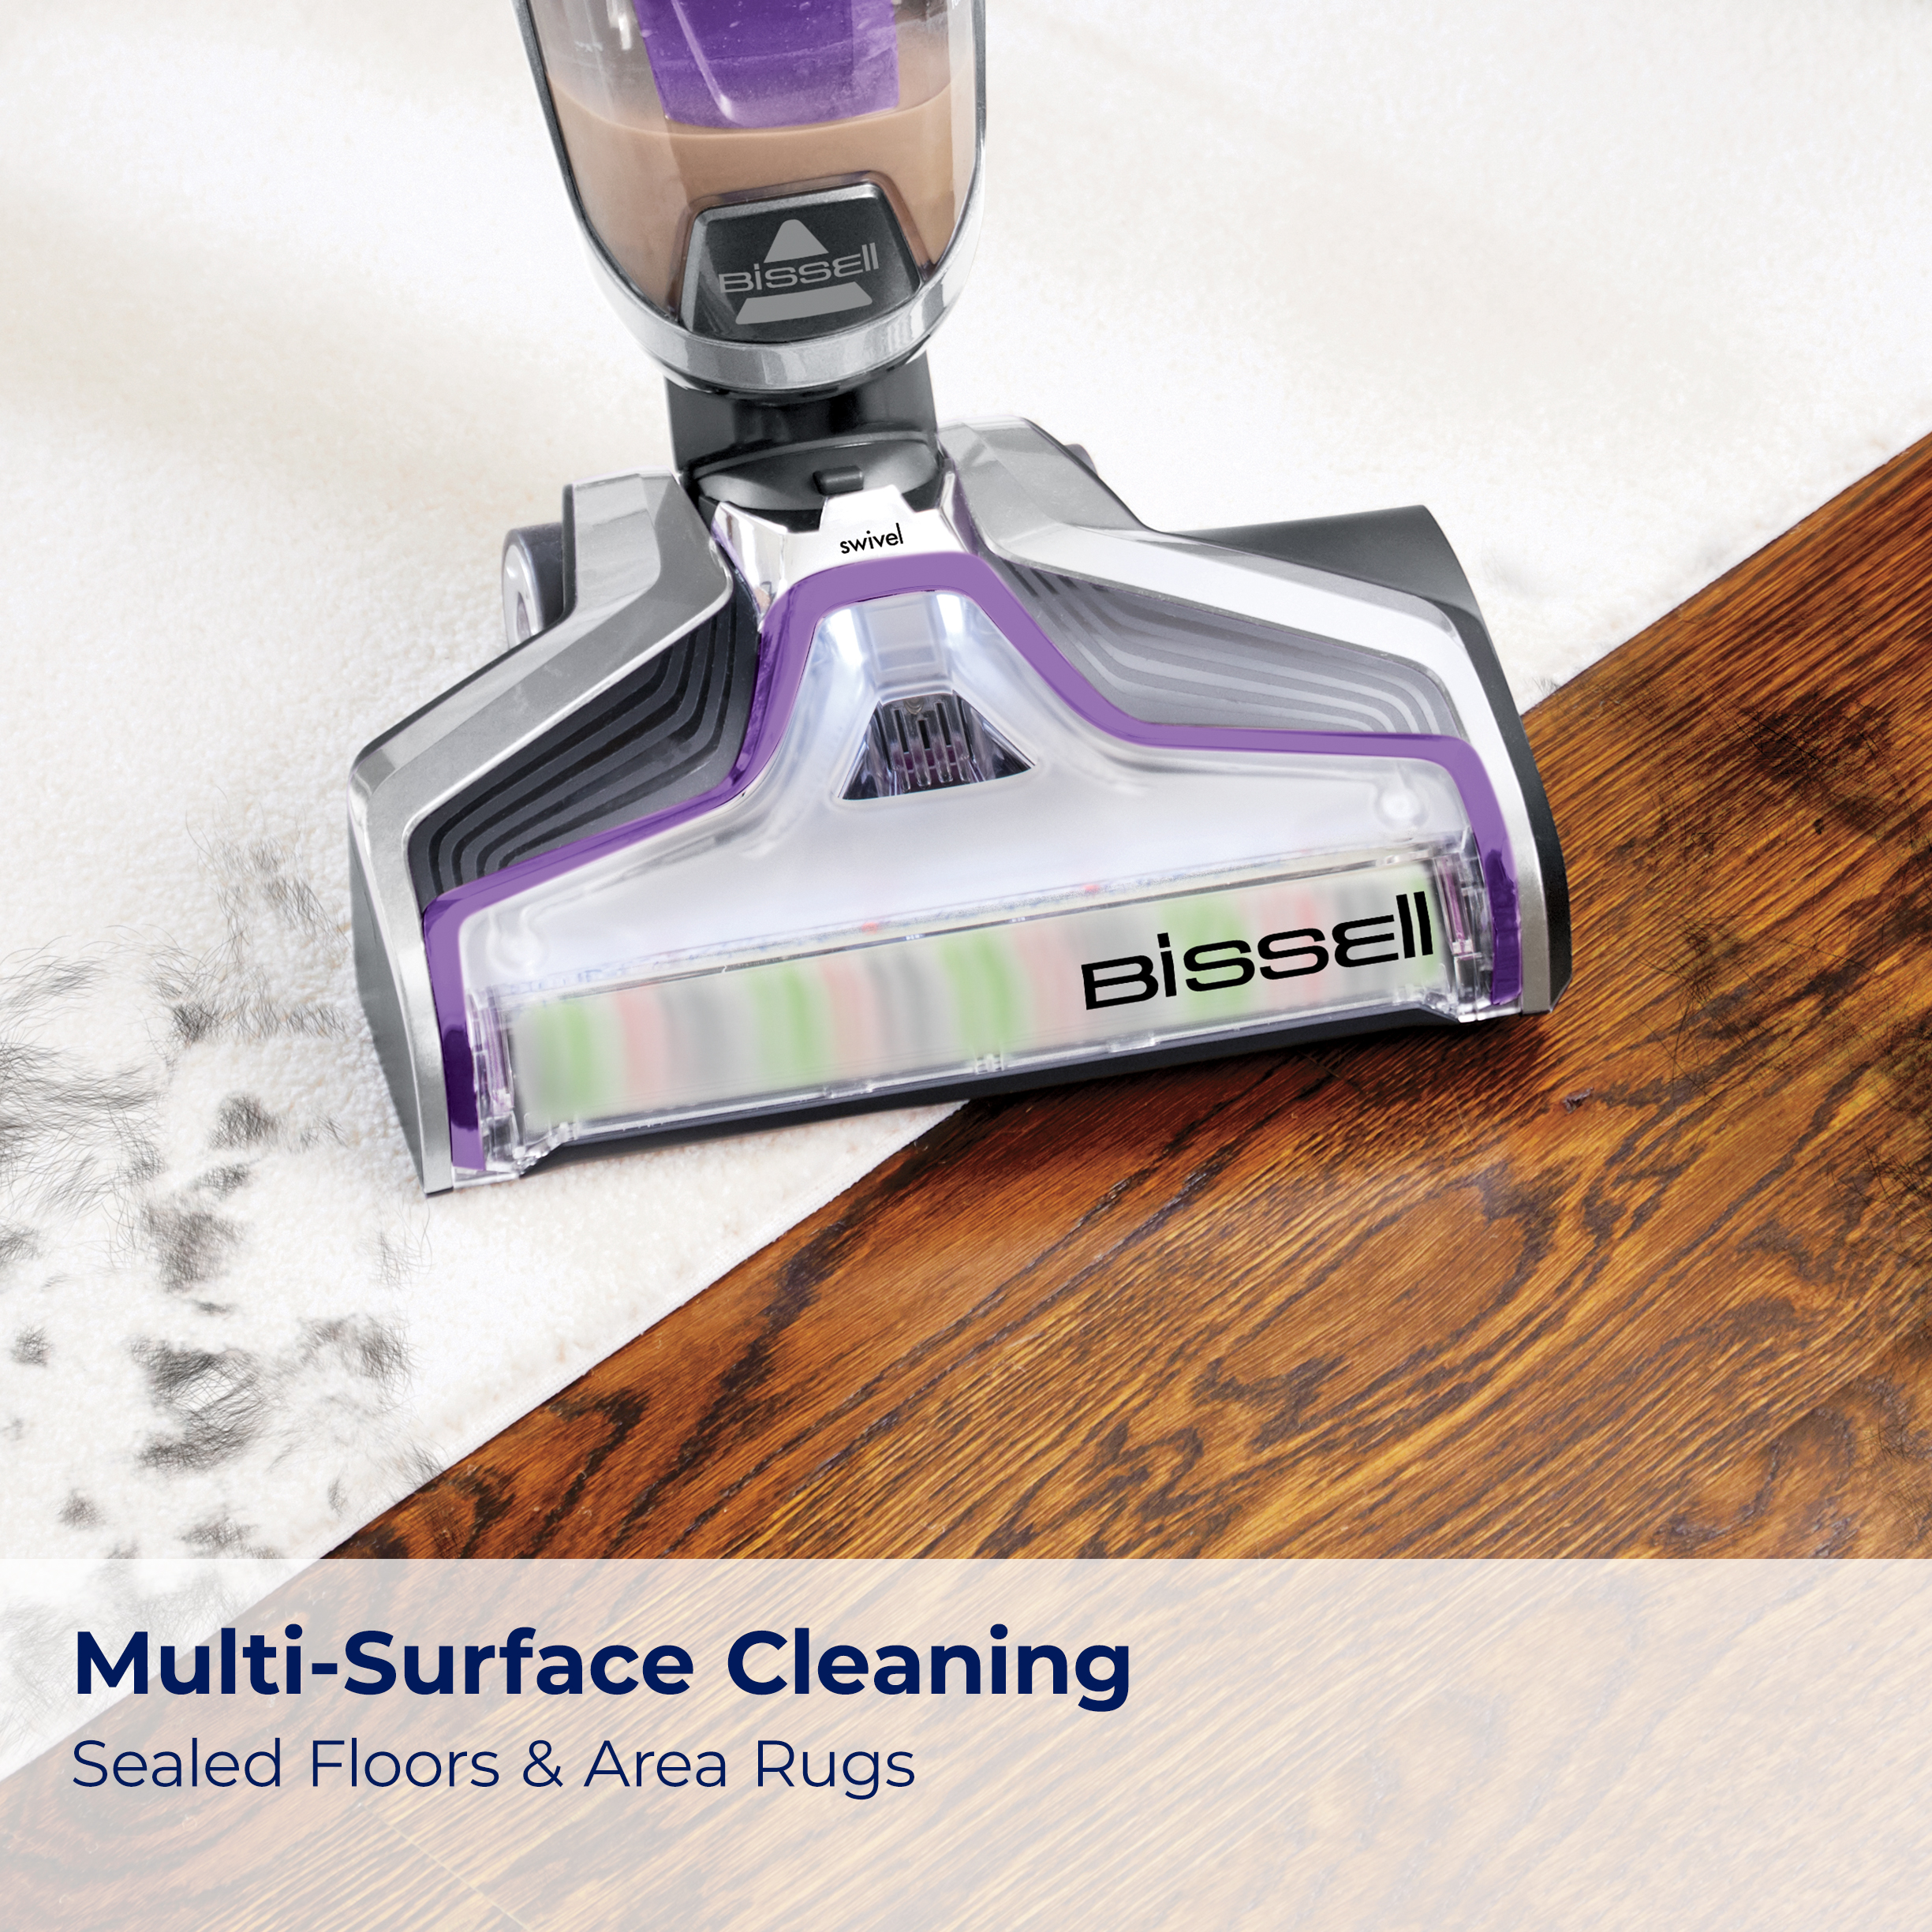 BISSELL® CrossWave® Turbo Pet Pro Multi-Surface Wet-Dry Vacuum 2328 - image 6 of 10